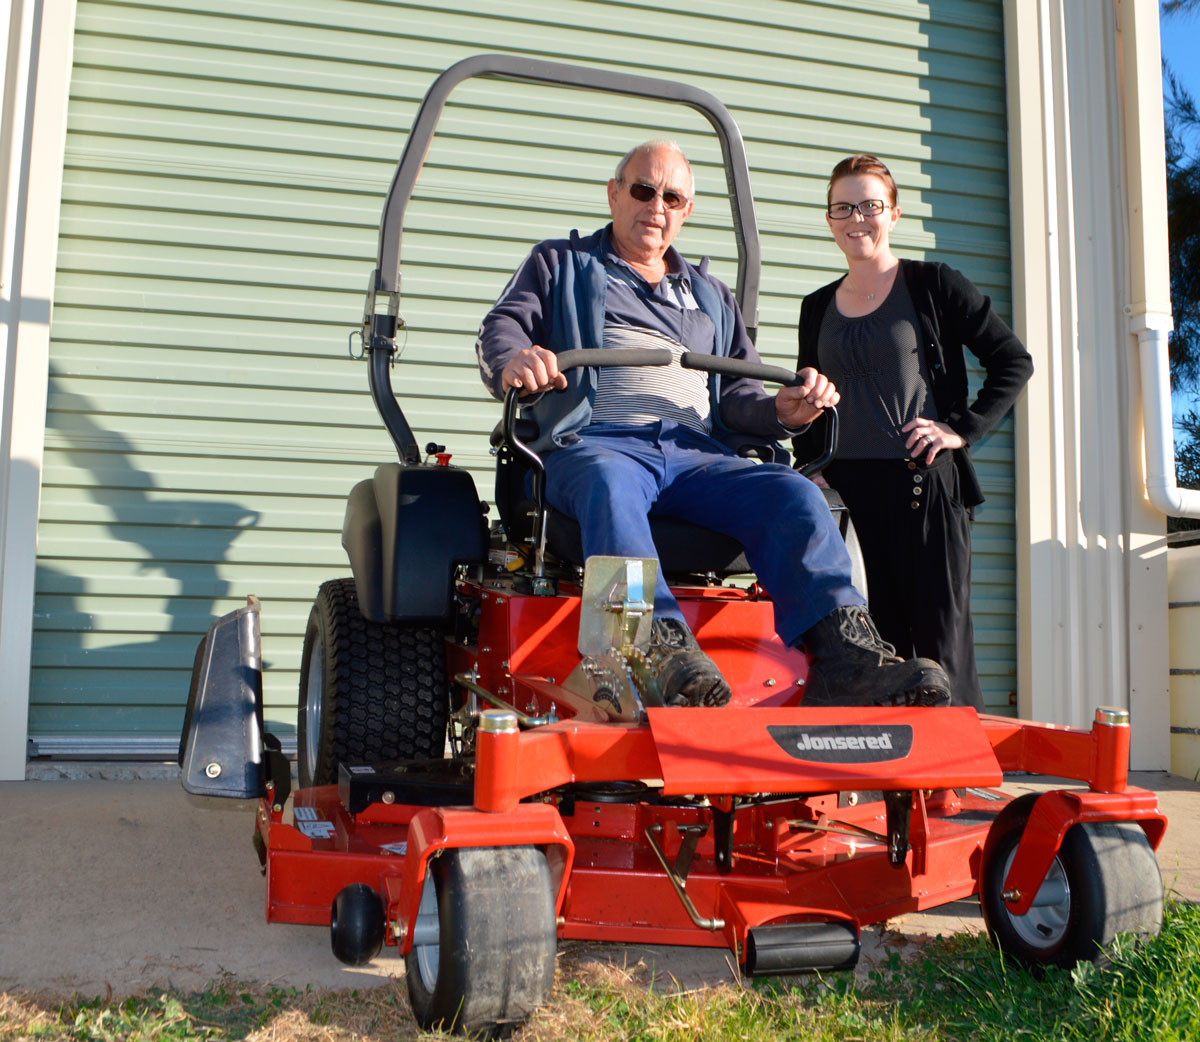 big red mower ready to mow – twin town times